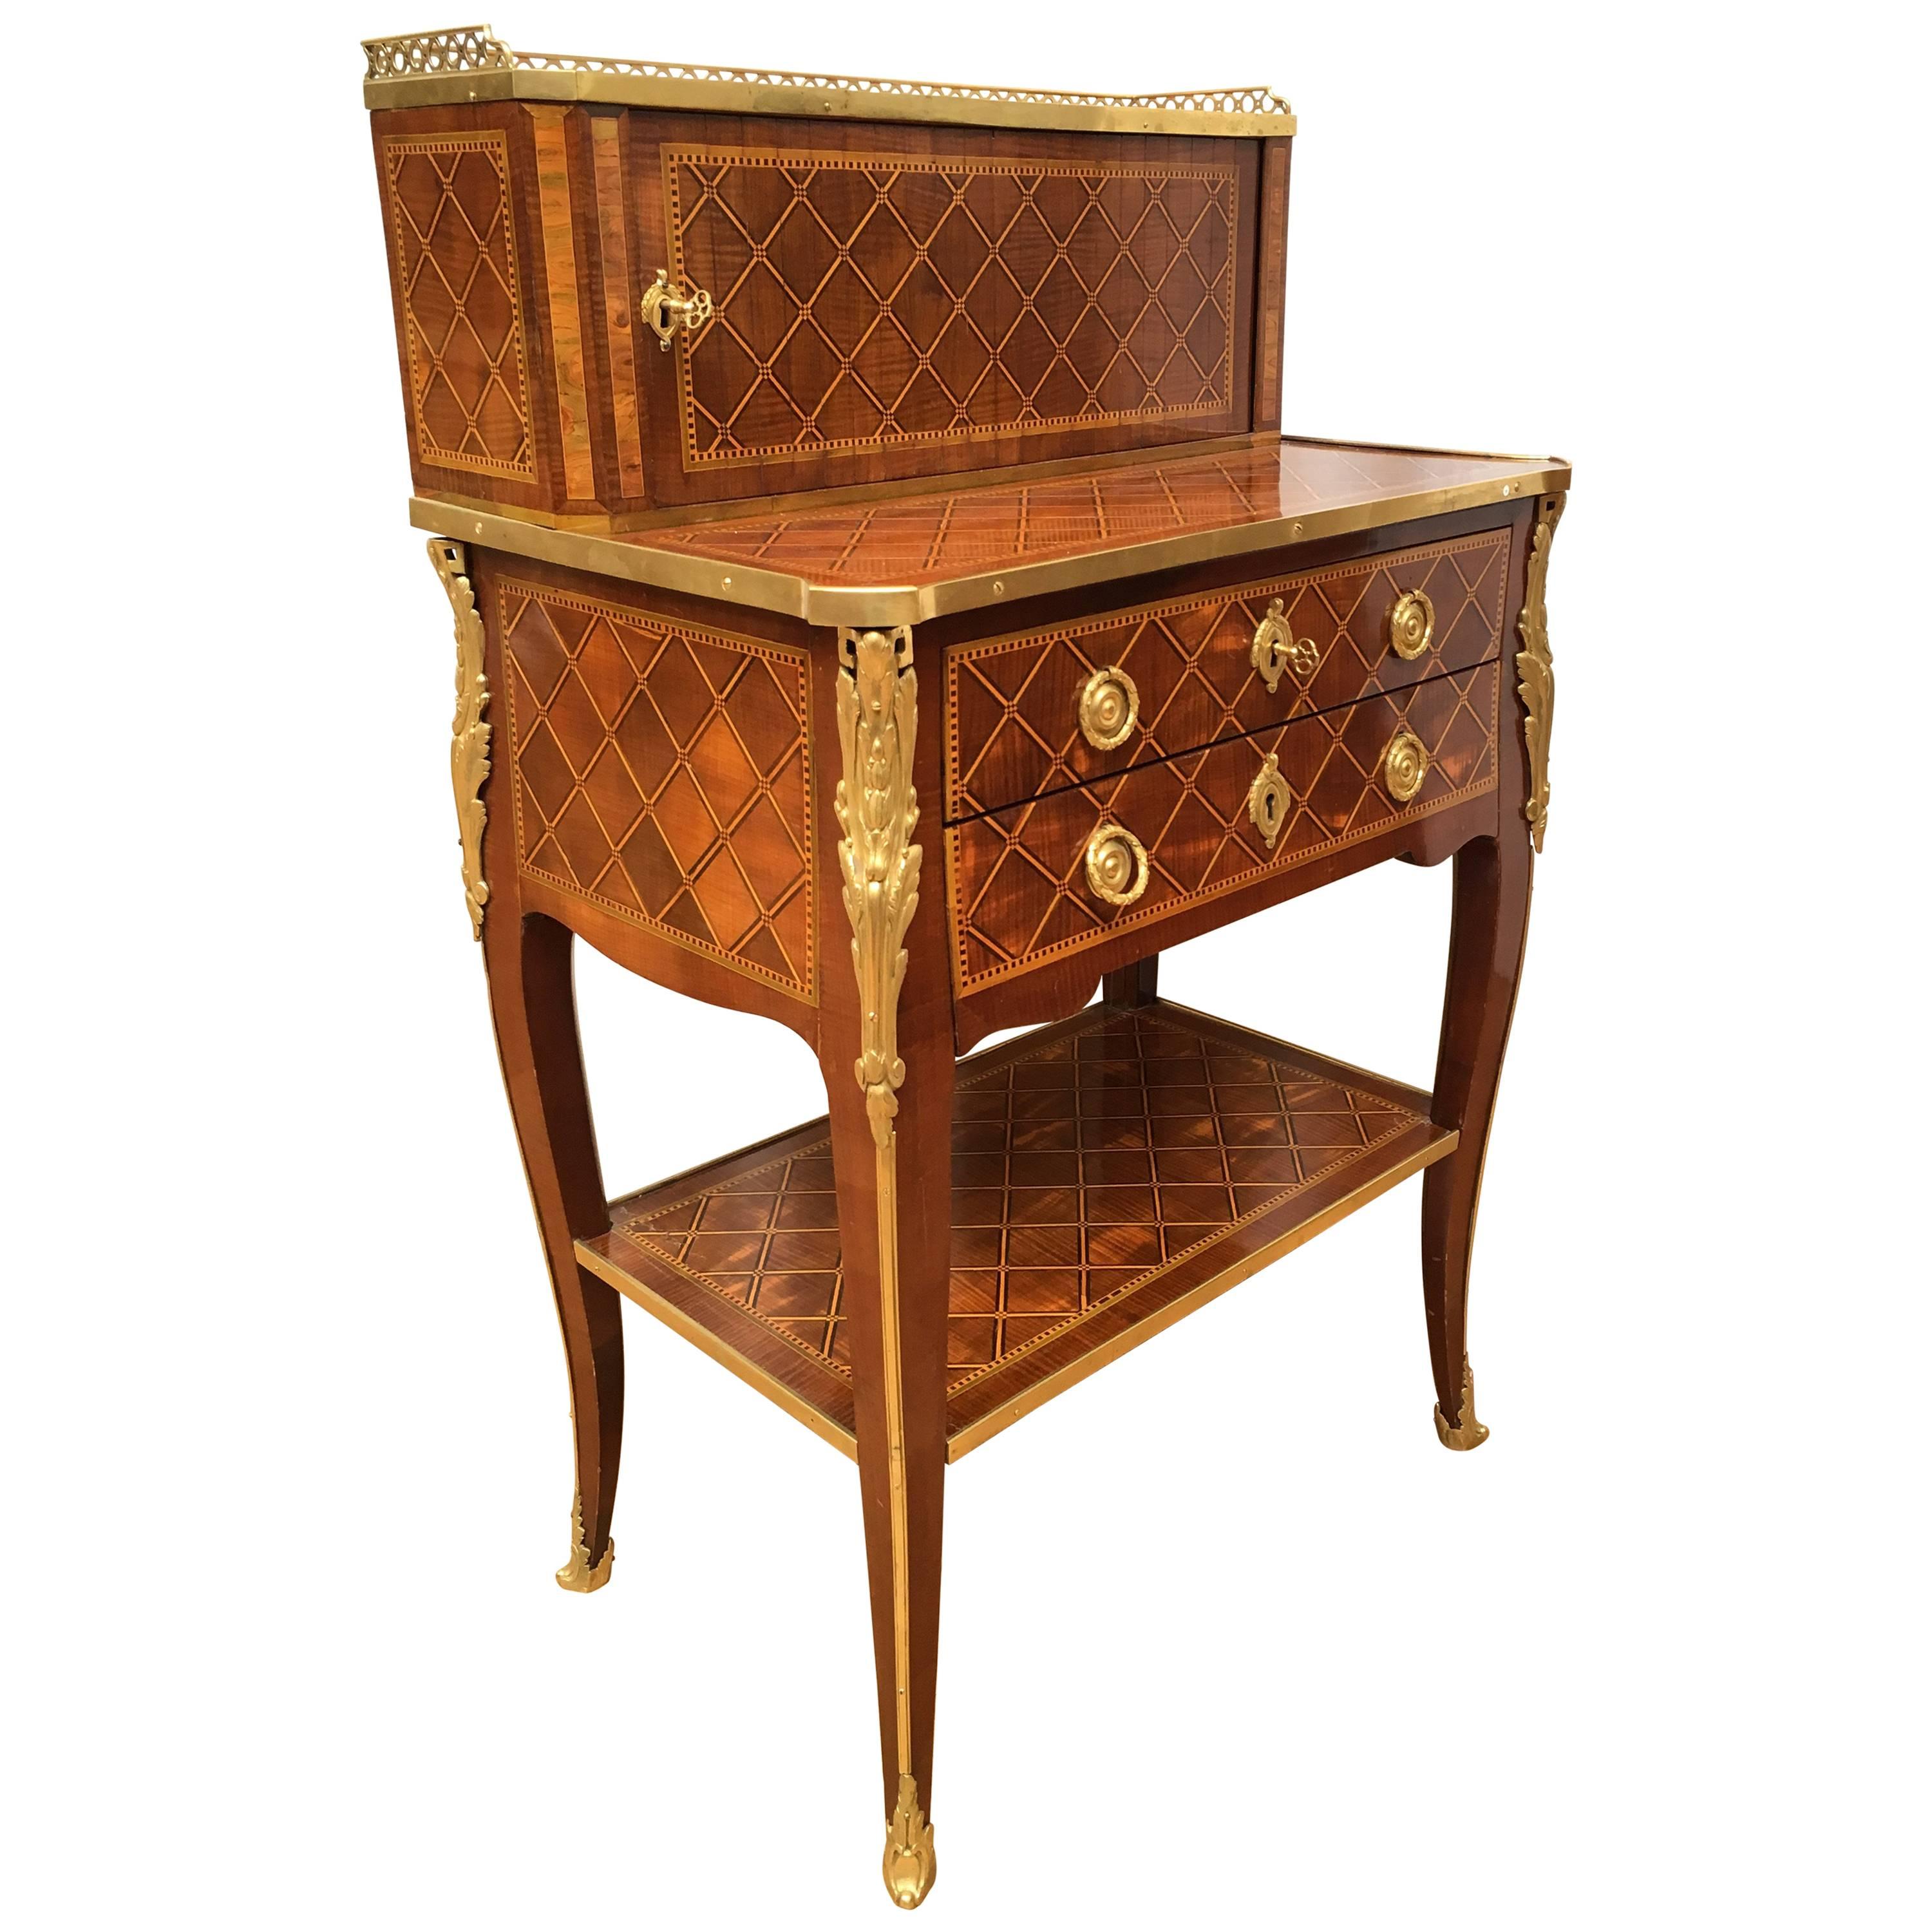 Late Louis XV Ormolu-Mounted Sycamore and Parquetry Bonheur-du-jour For Sale